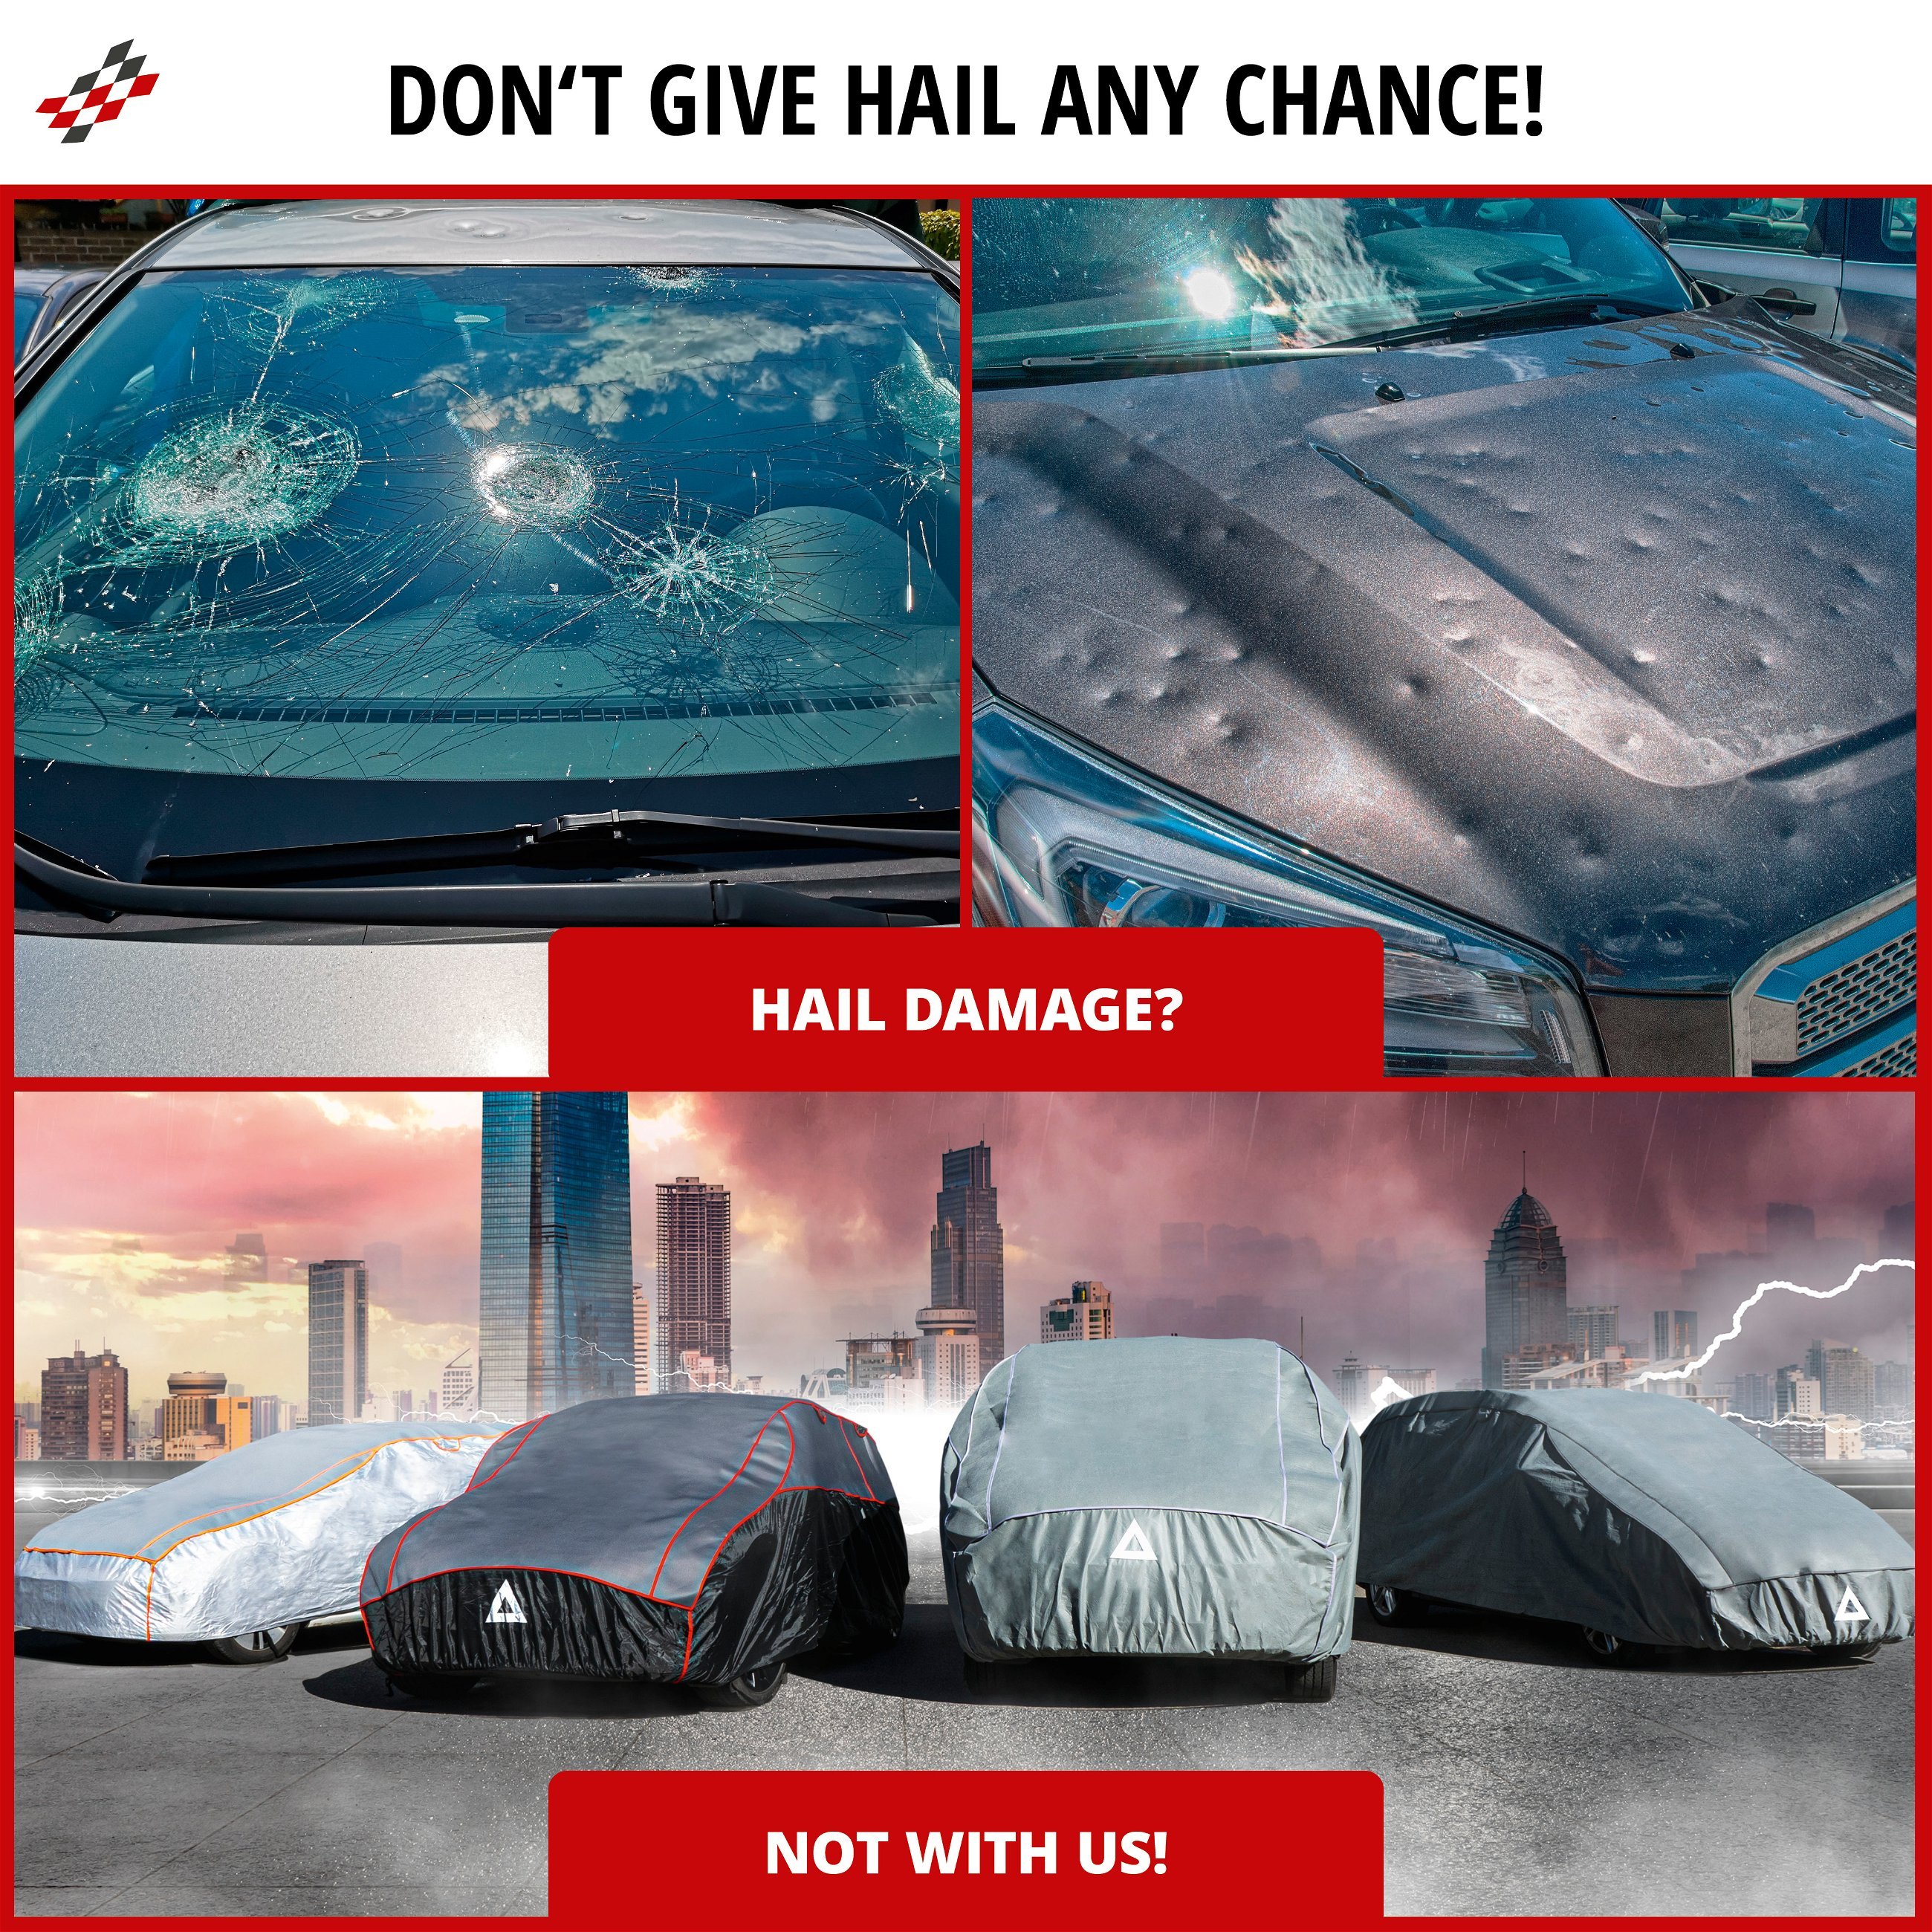 Car hail protection cover Hybrid UV Protect SUV size S